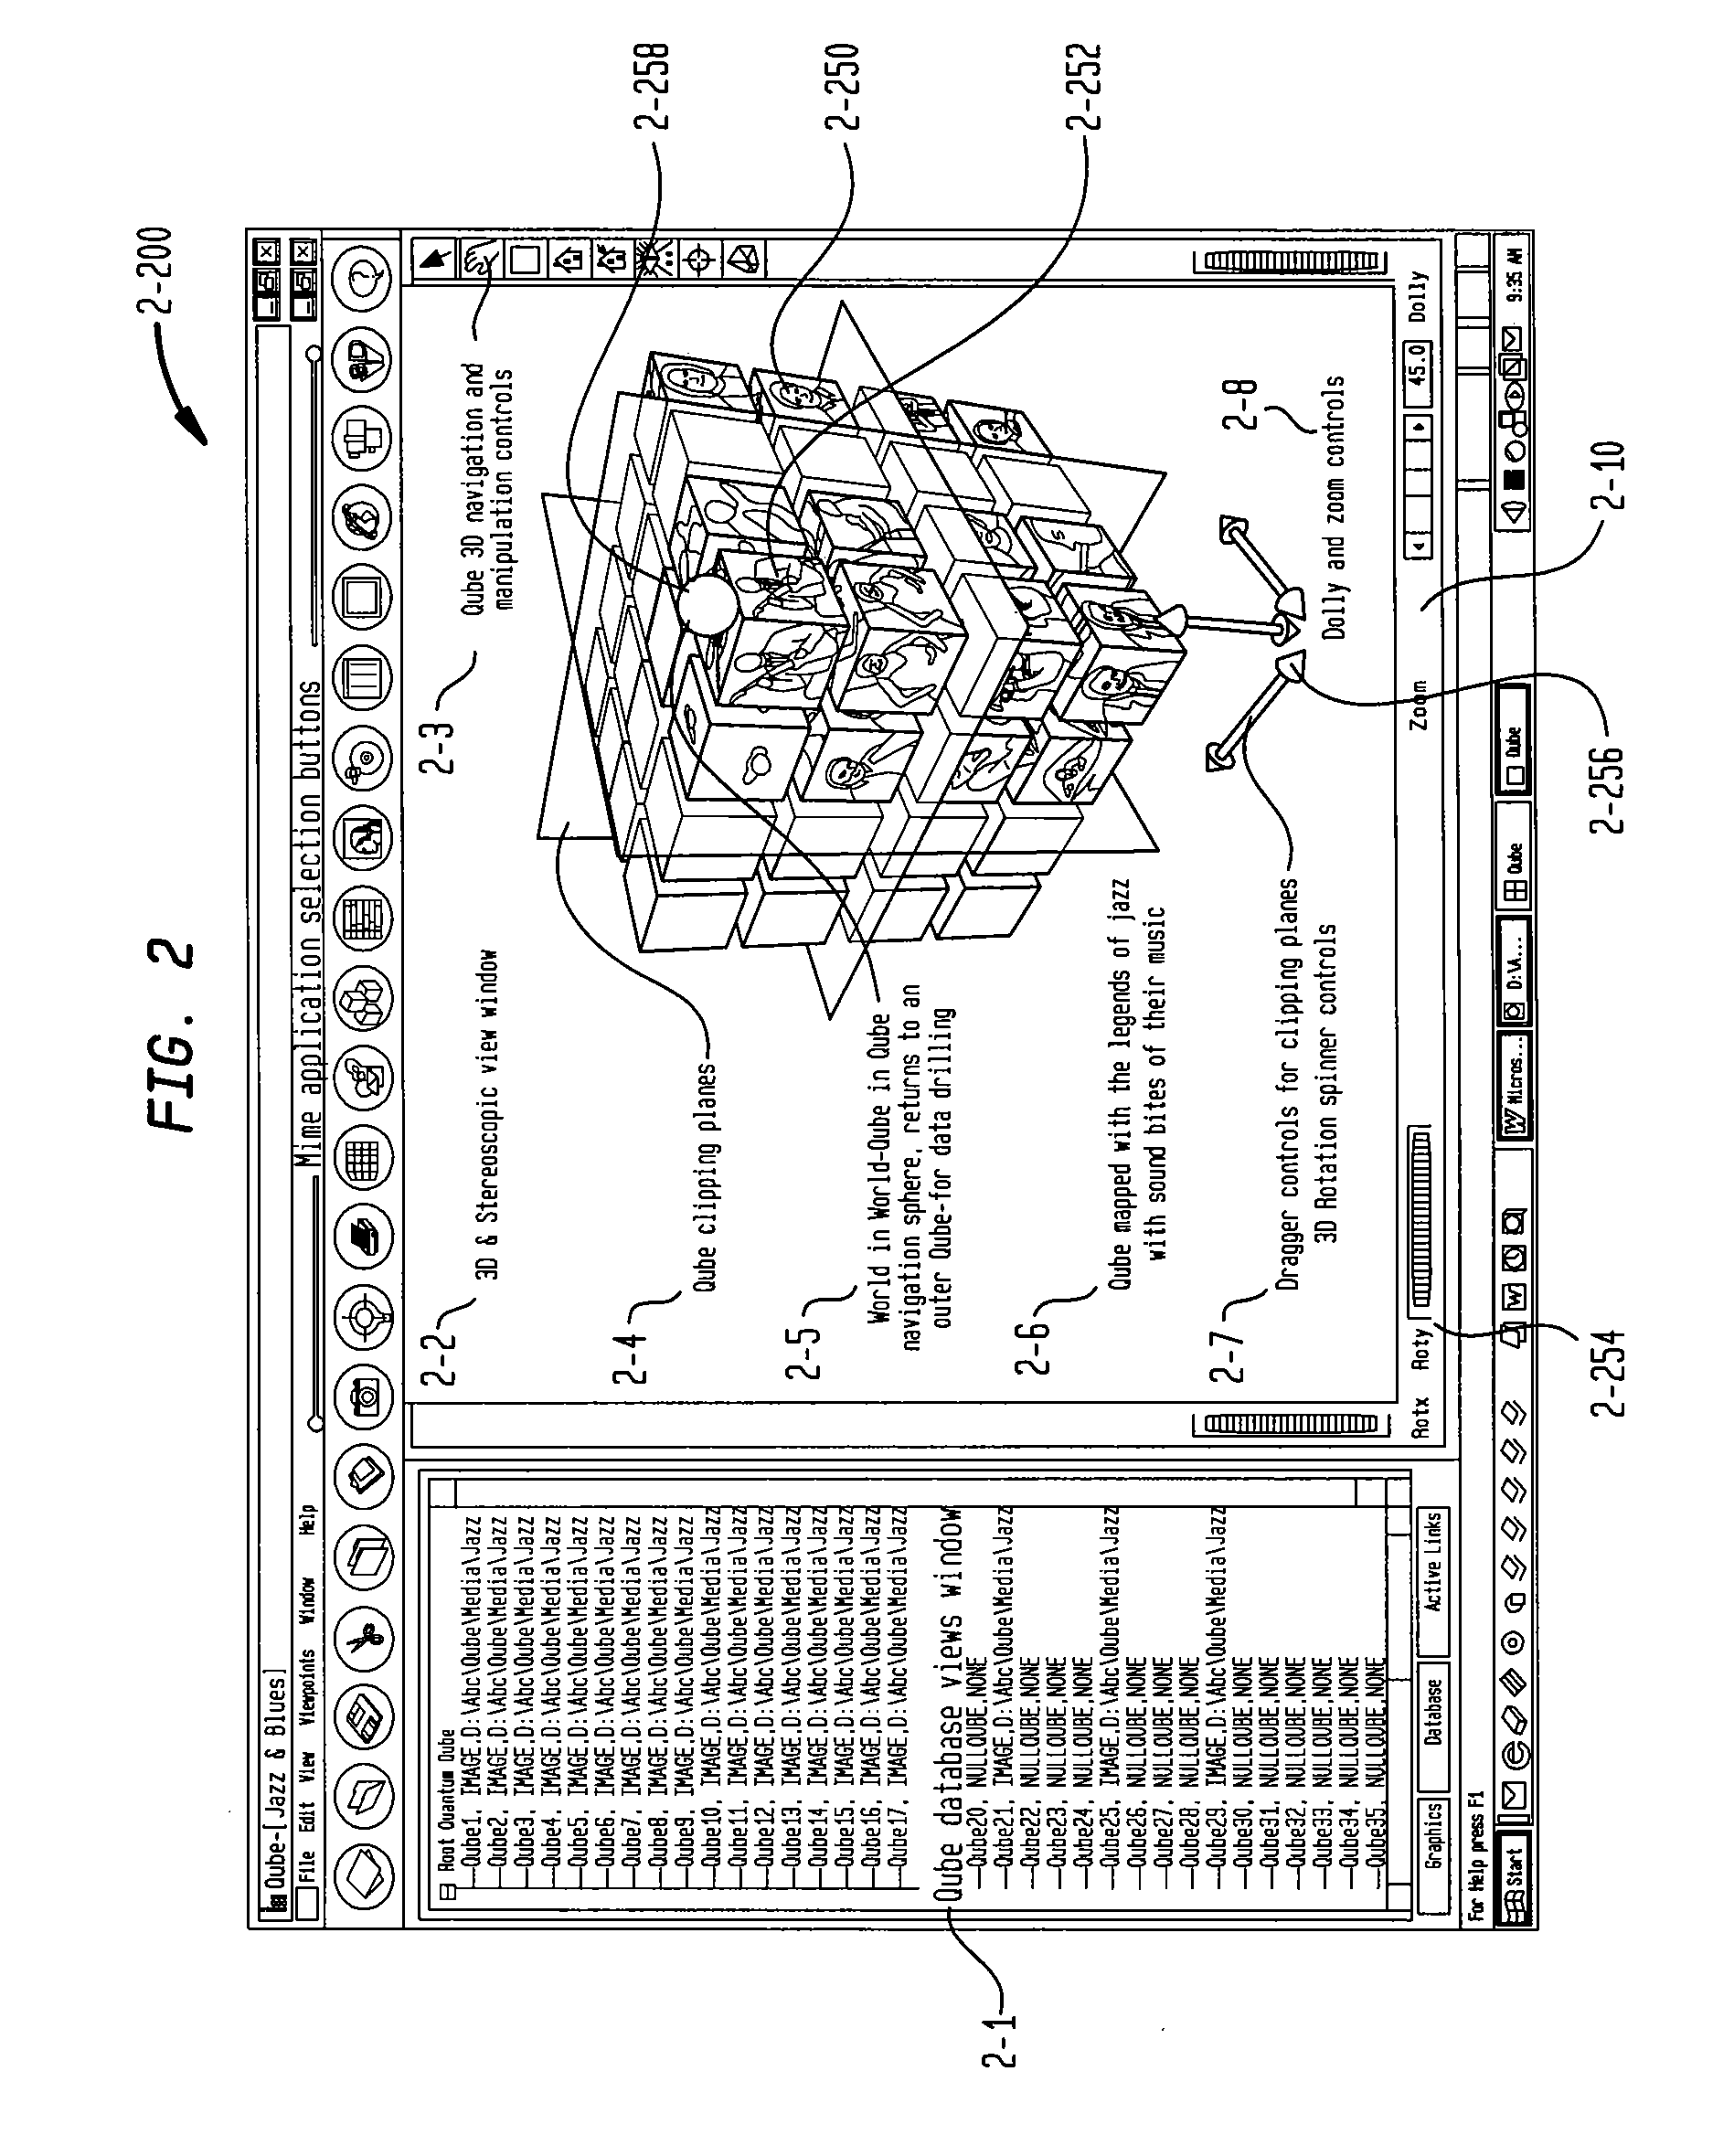 System and Method for Multi-Dimensional Organization, Management, and Manipulation of Data